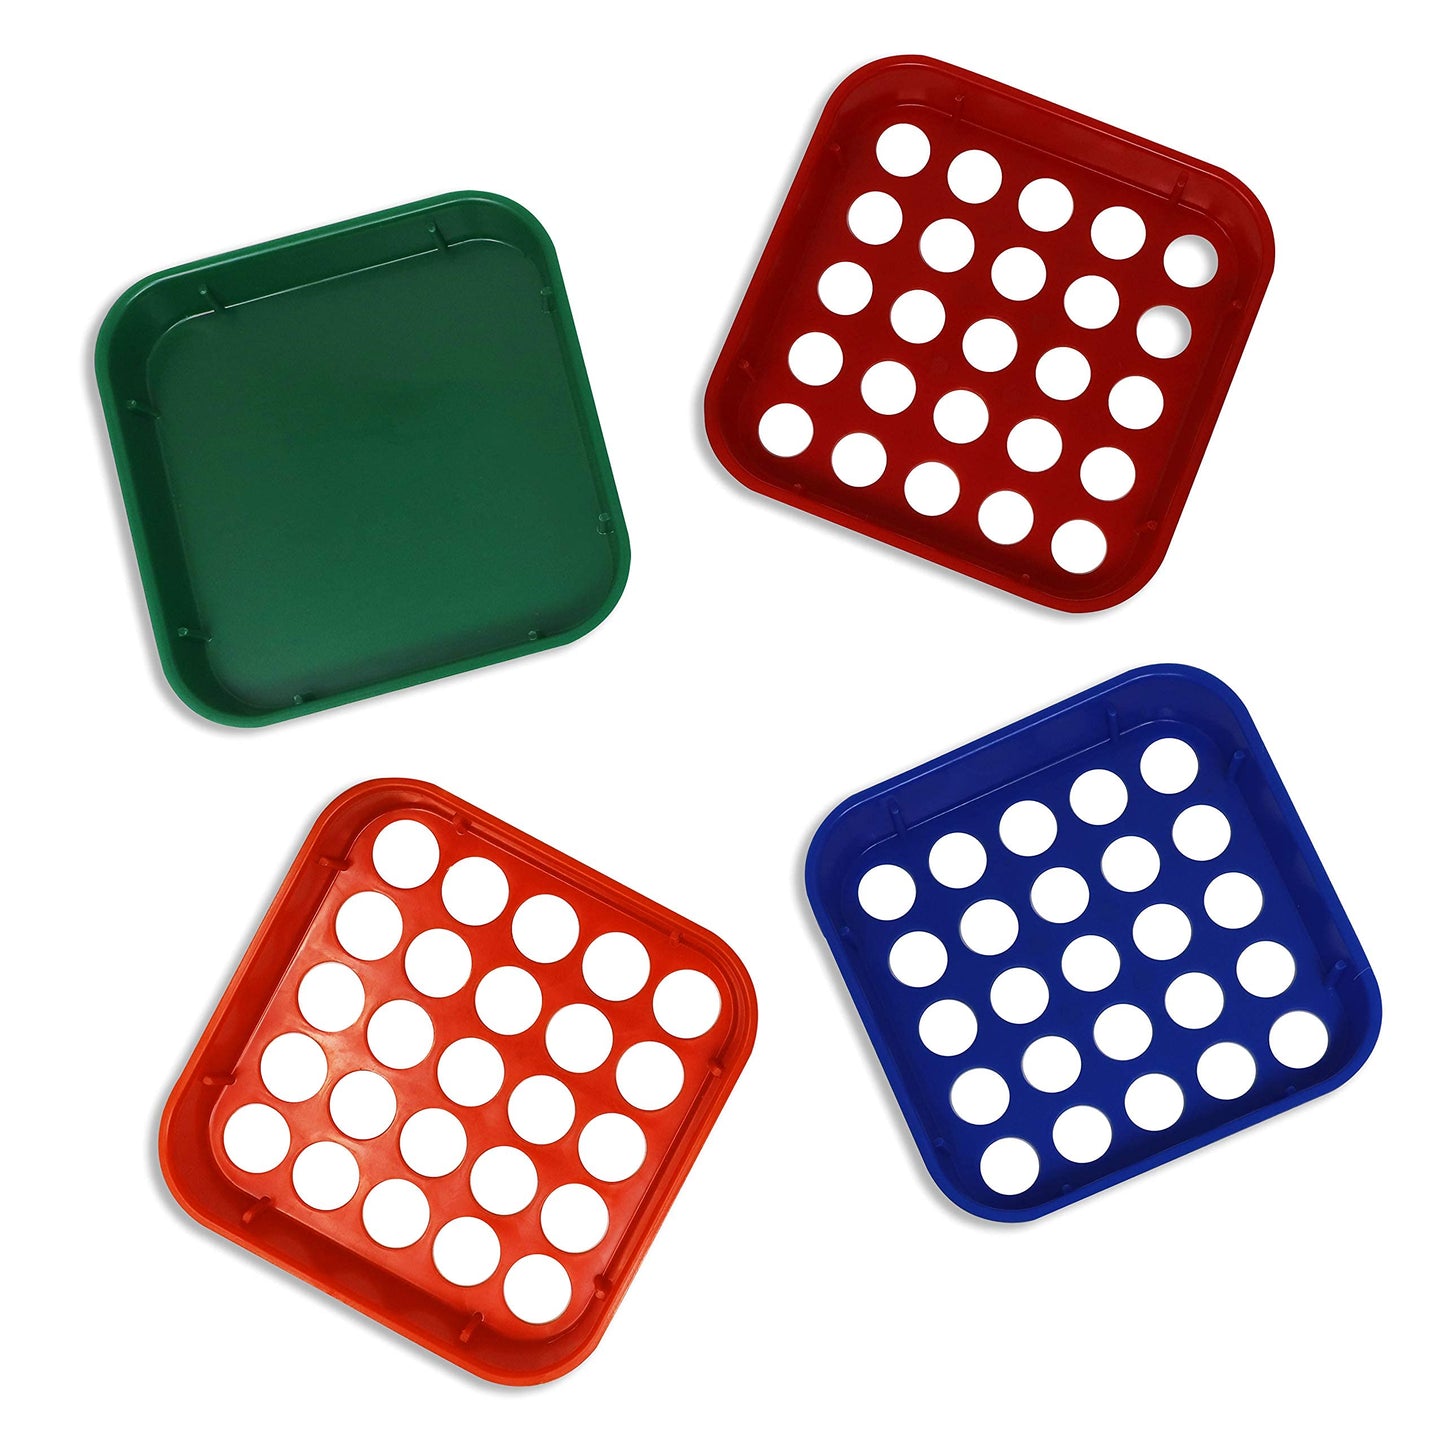 Coin Sorting Trays Set, 4 Pack with 20 coin Wrappers